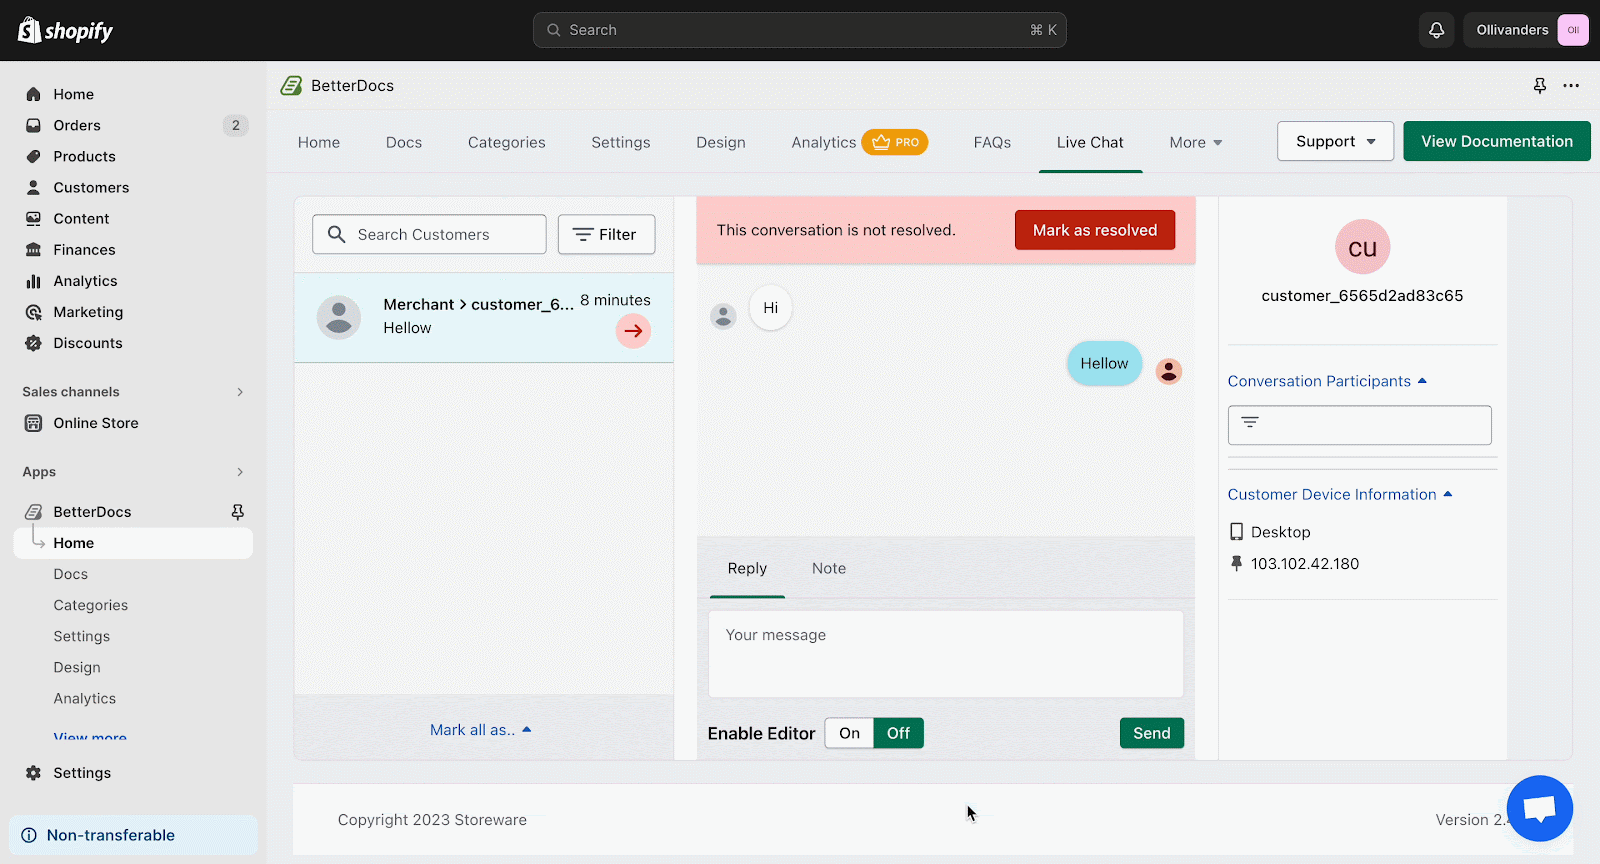 Live Chat In BetterDocs For Shopify?